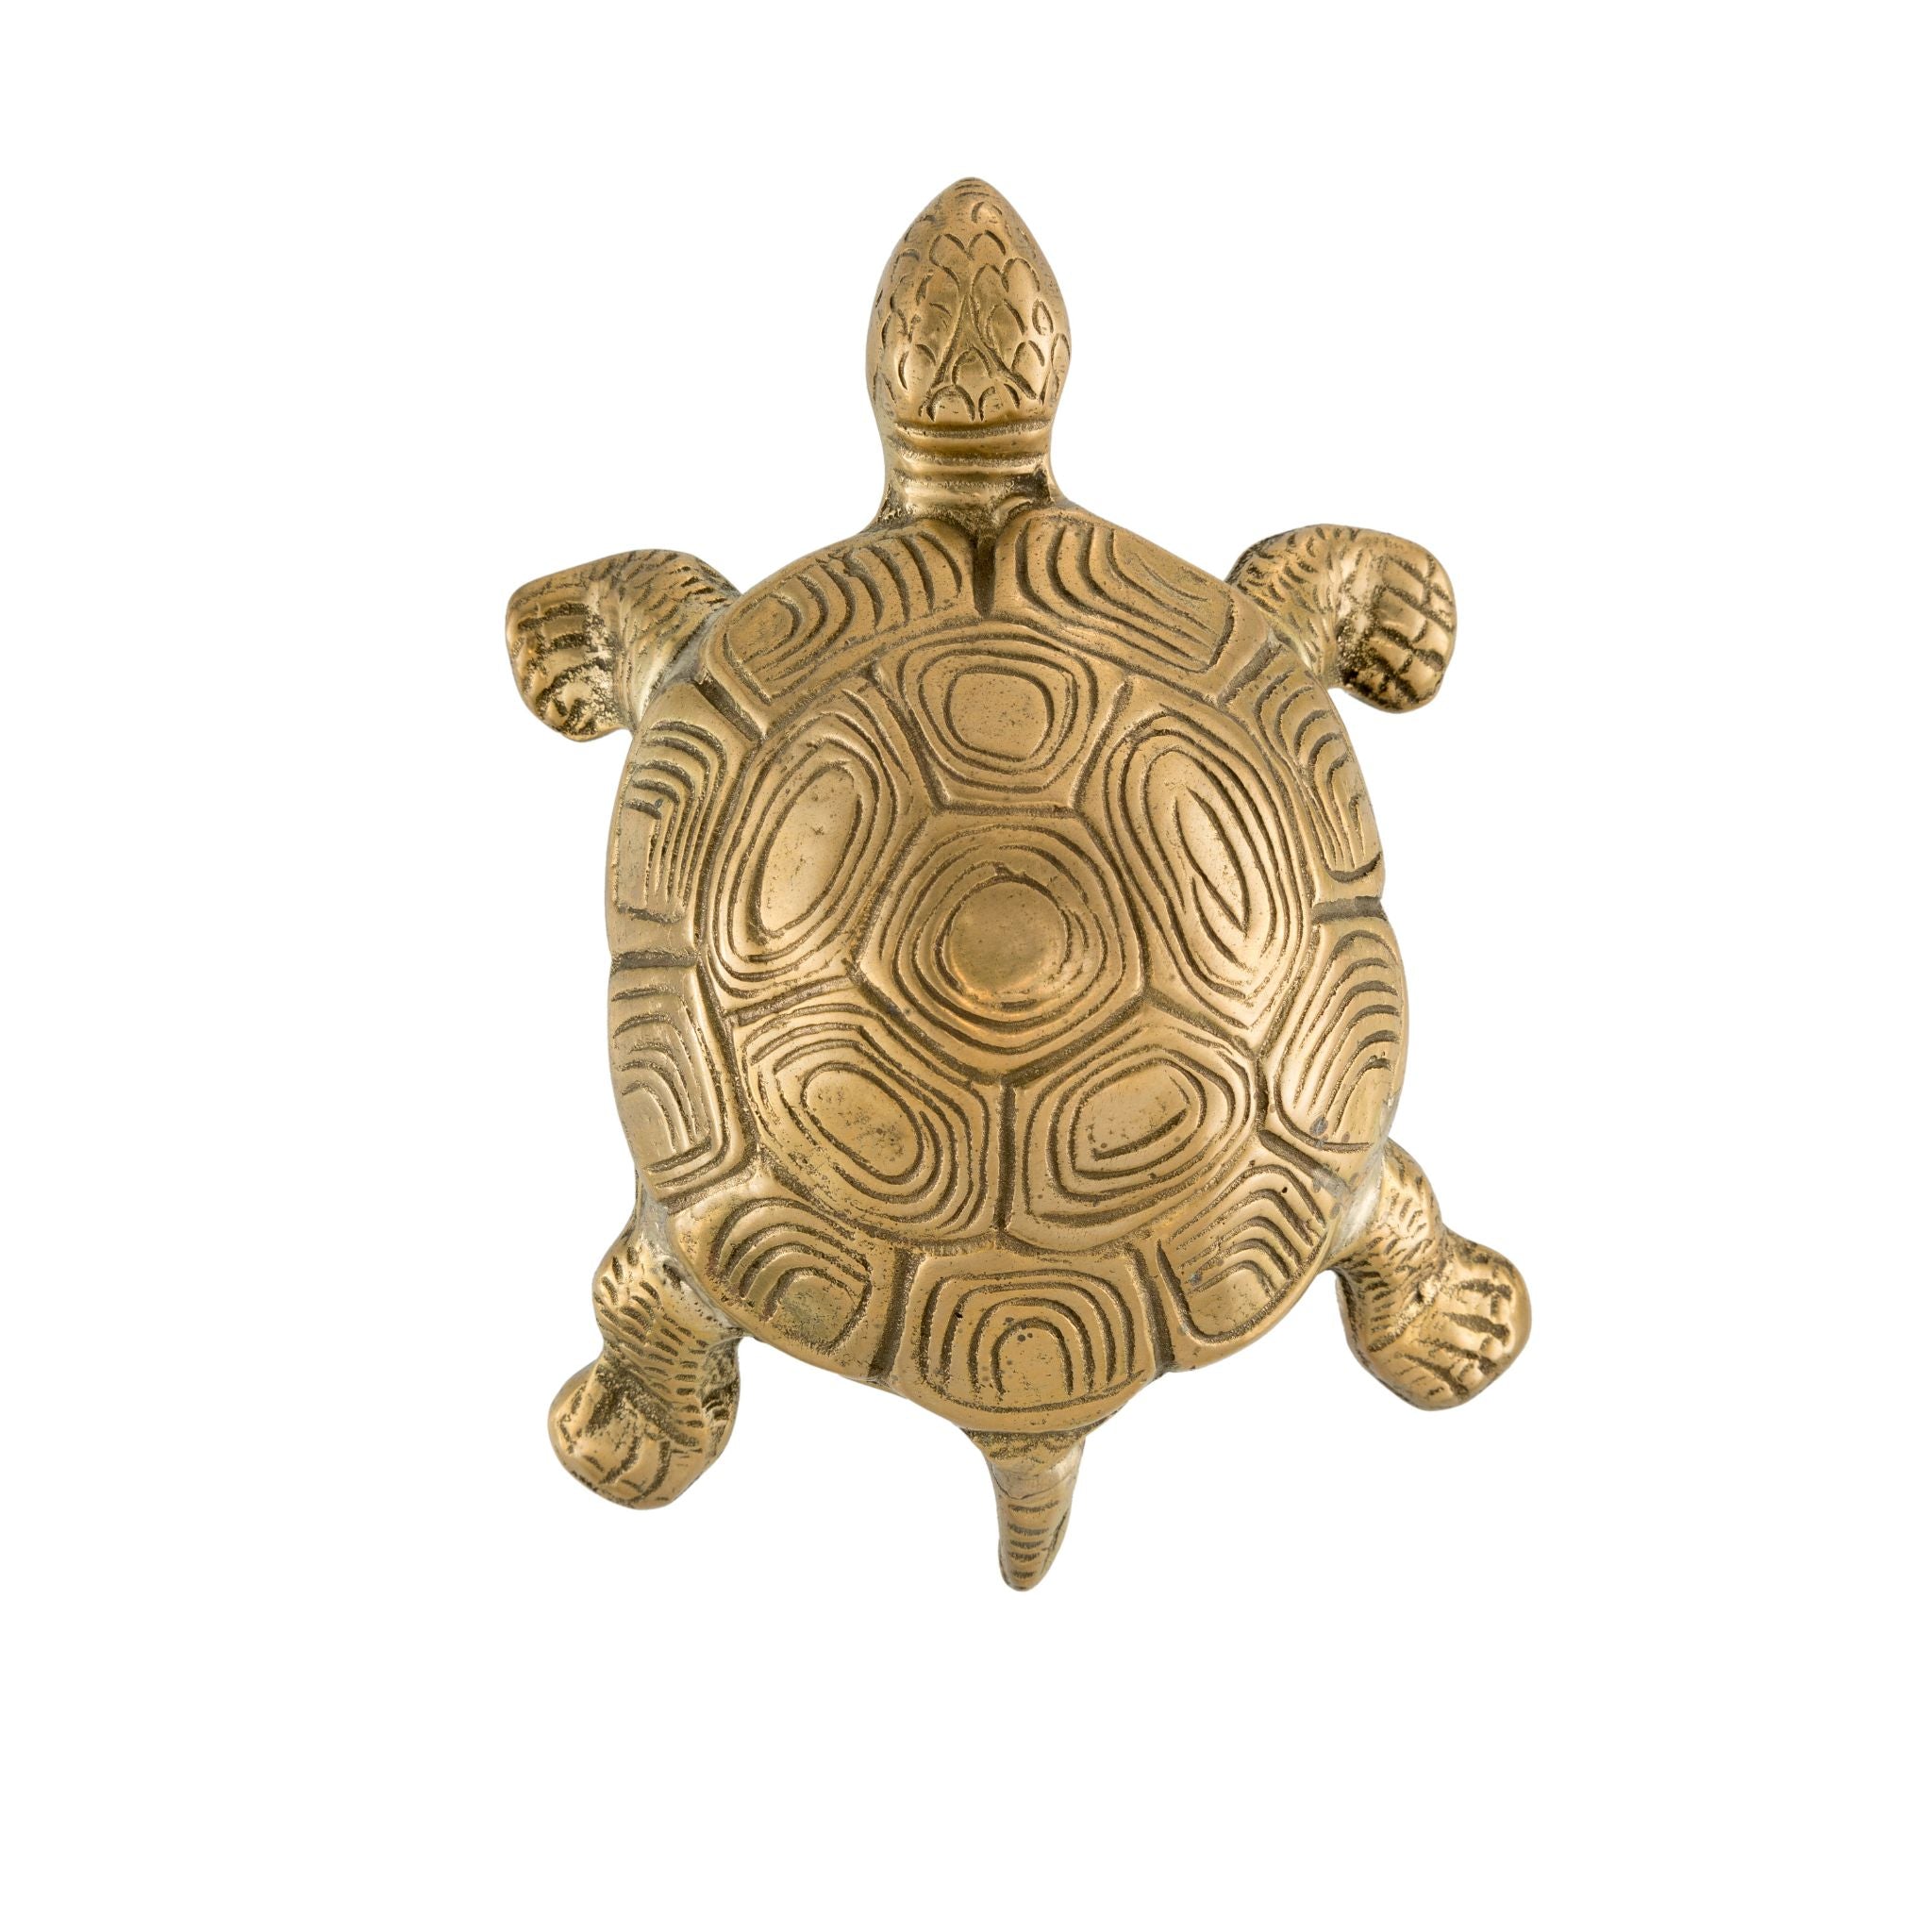 An image of a medium-sized brass turtle-shaped knob against a neutral background. The knob is intricately designed with attention to detail, showcasing the turtle's shell and features. Perfect for adding a touch of charm and personality to cabinets or drawers.